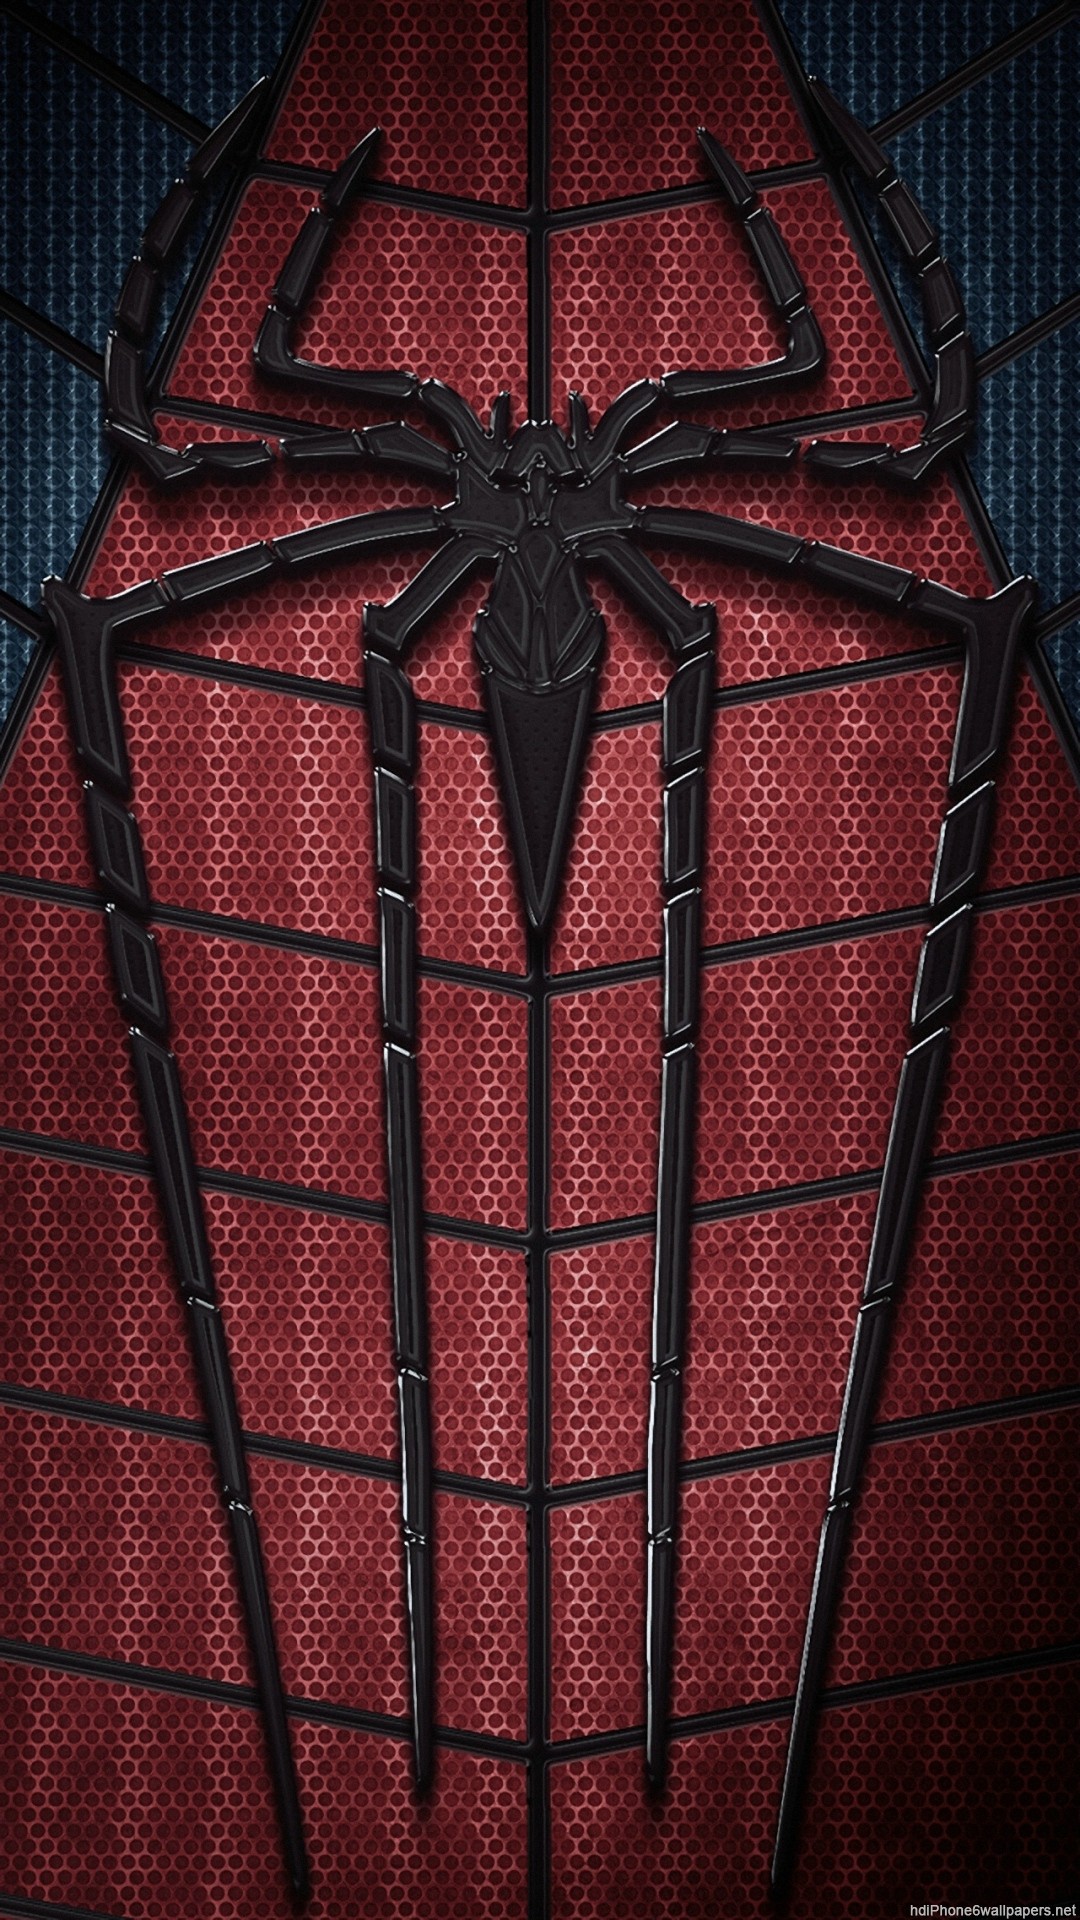 The Amazing Spider Man 2014 Iphone 6 Wallpapers Hd - Iphone 6 Wallpaper Spiderman - HD Wallpaper 